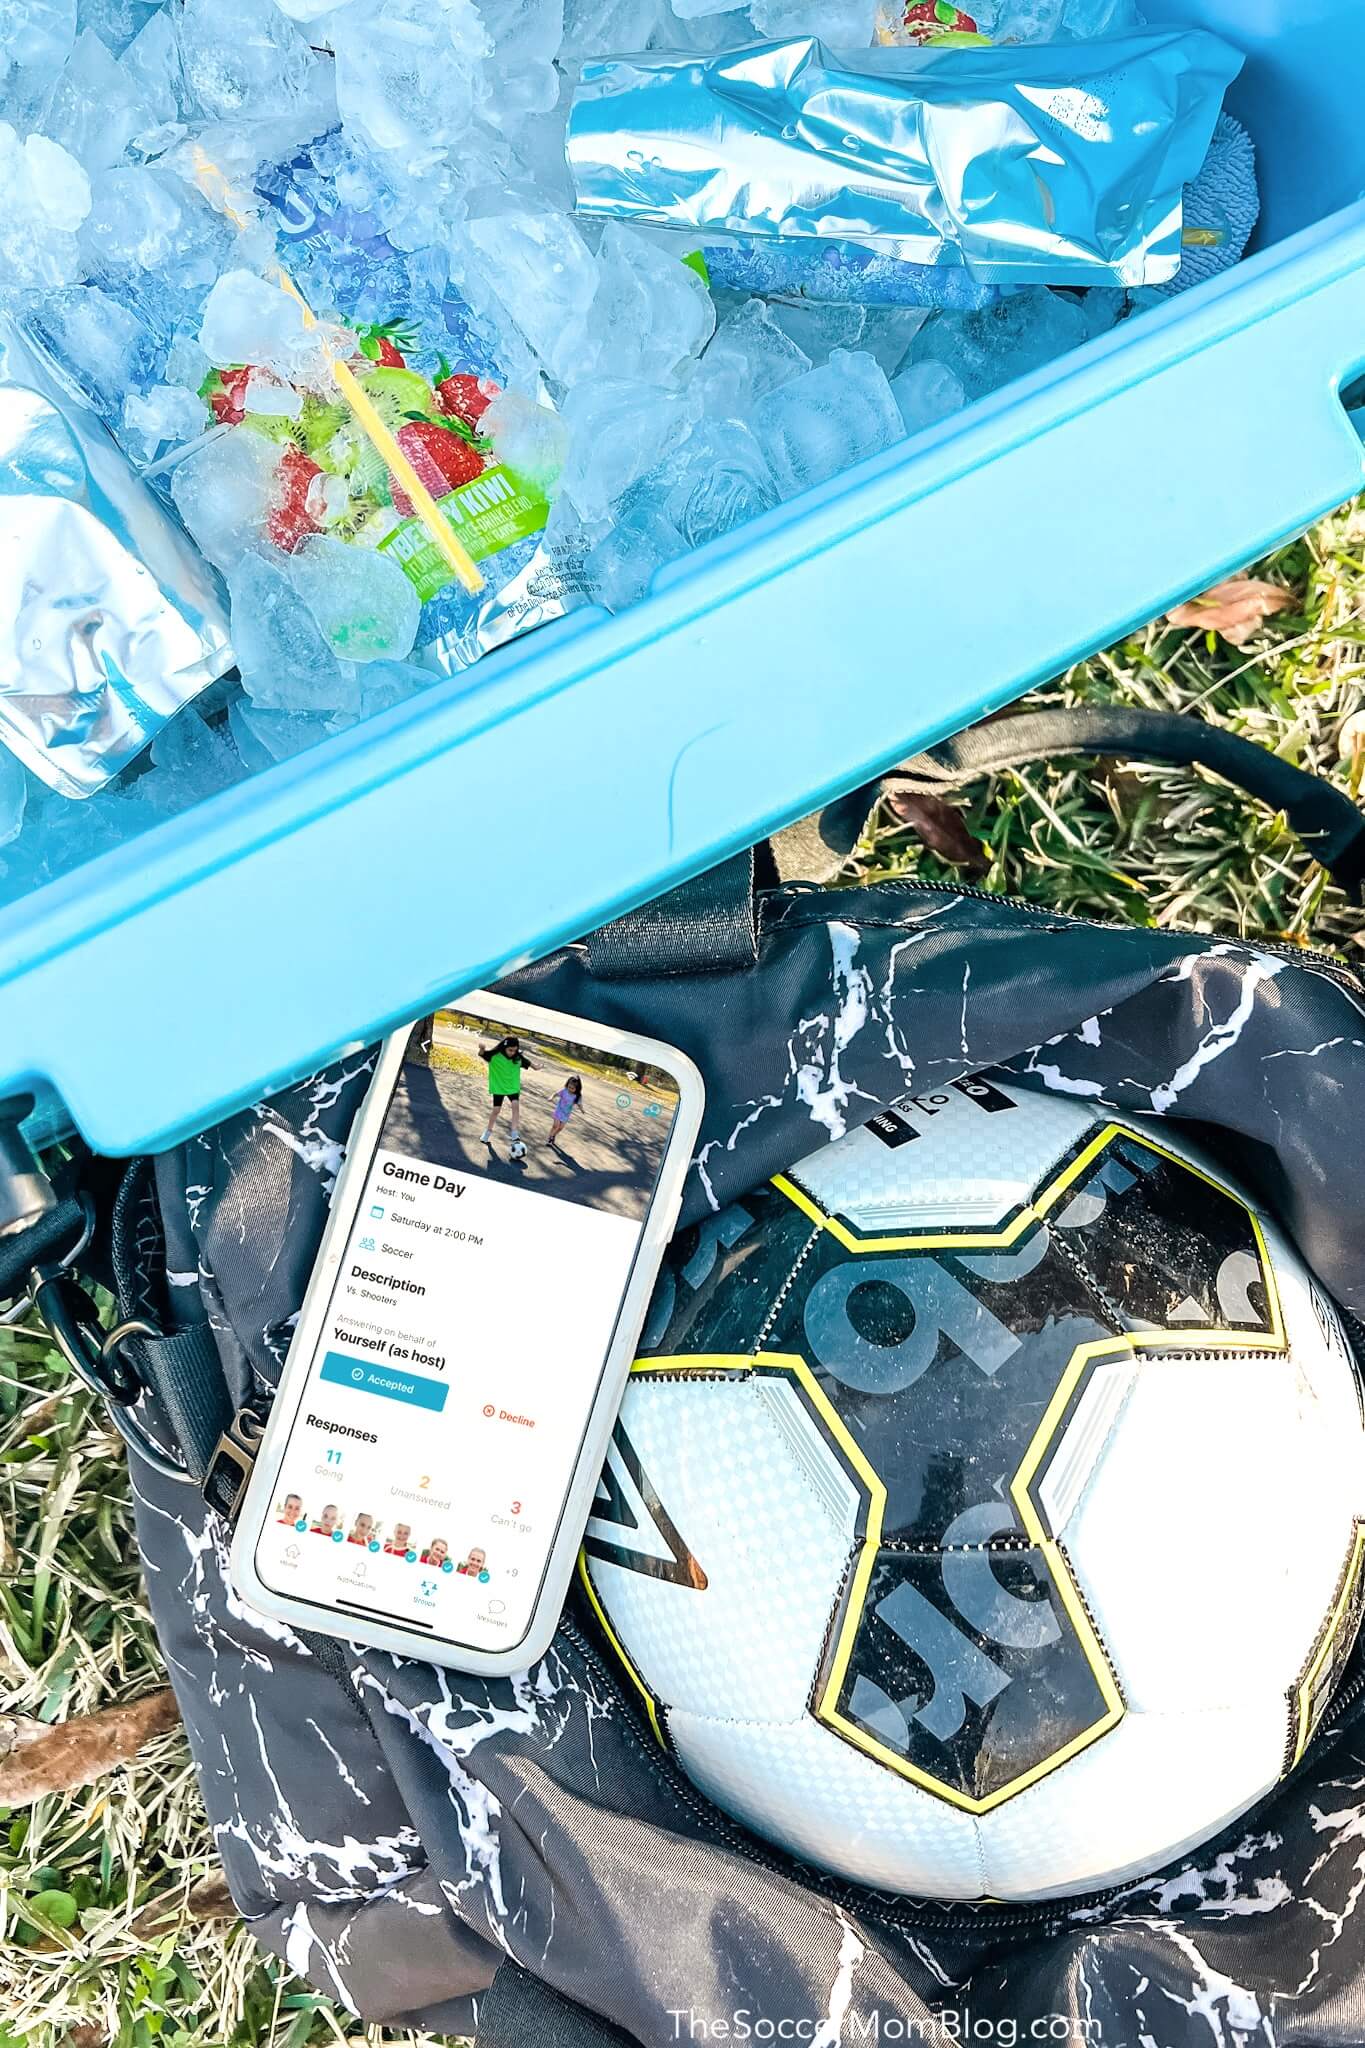 cooler with drinks, soccer ball, and phone with Spond app screen open